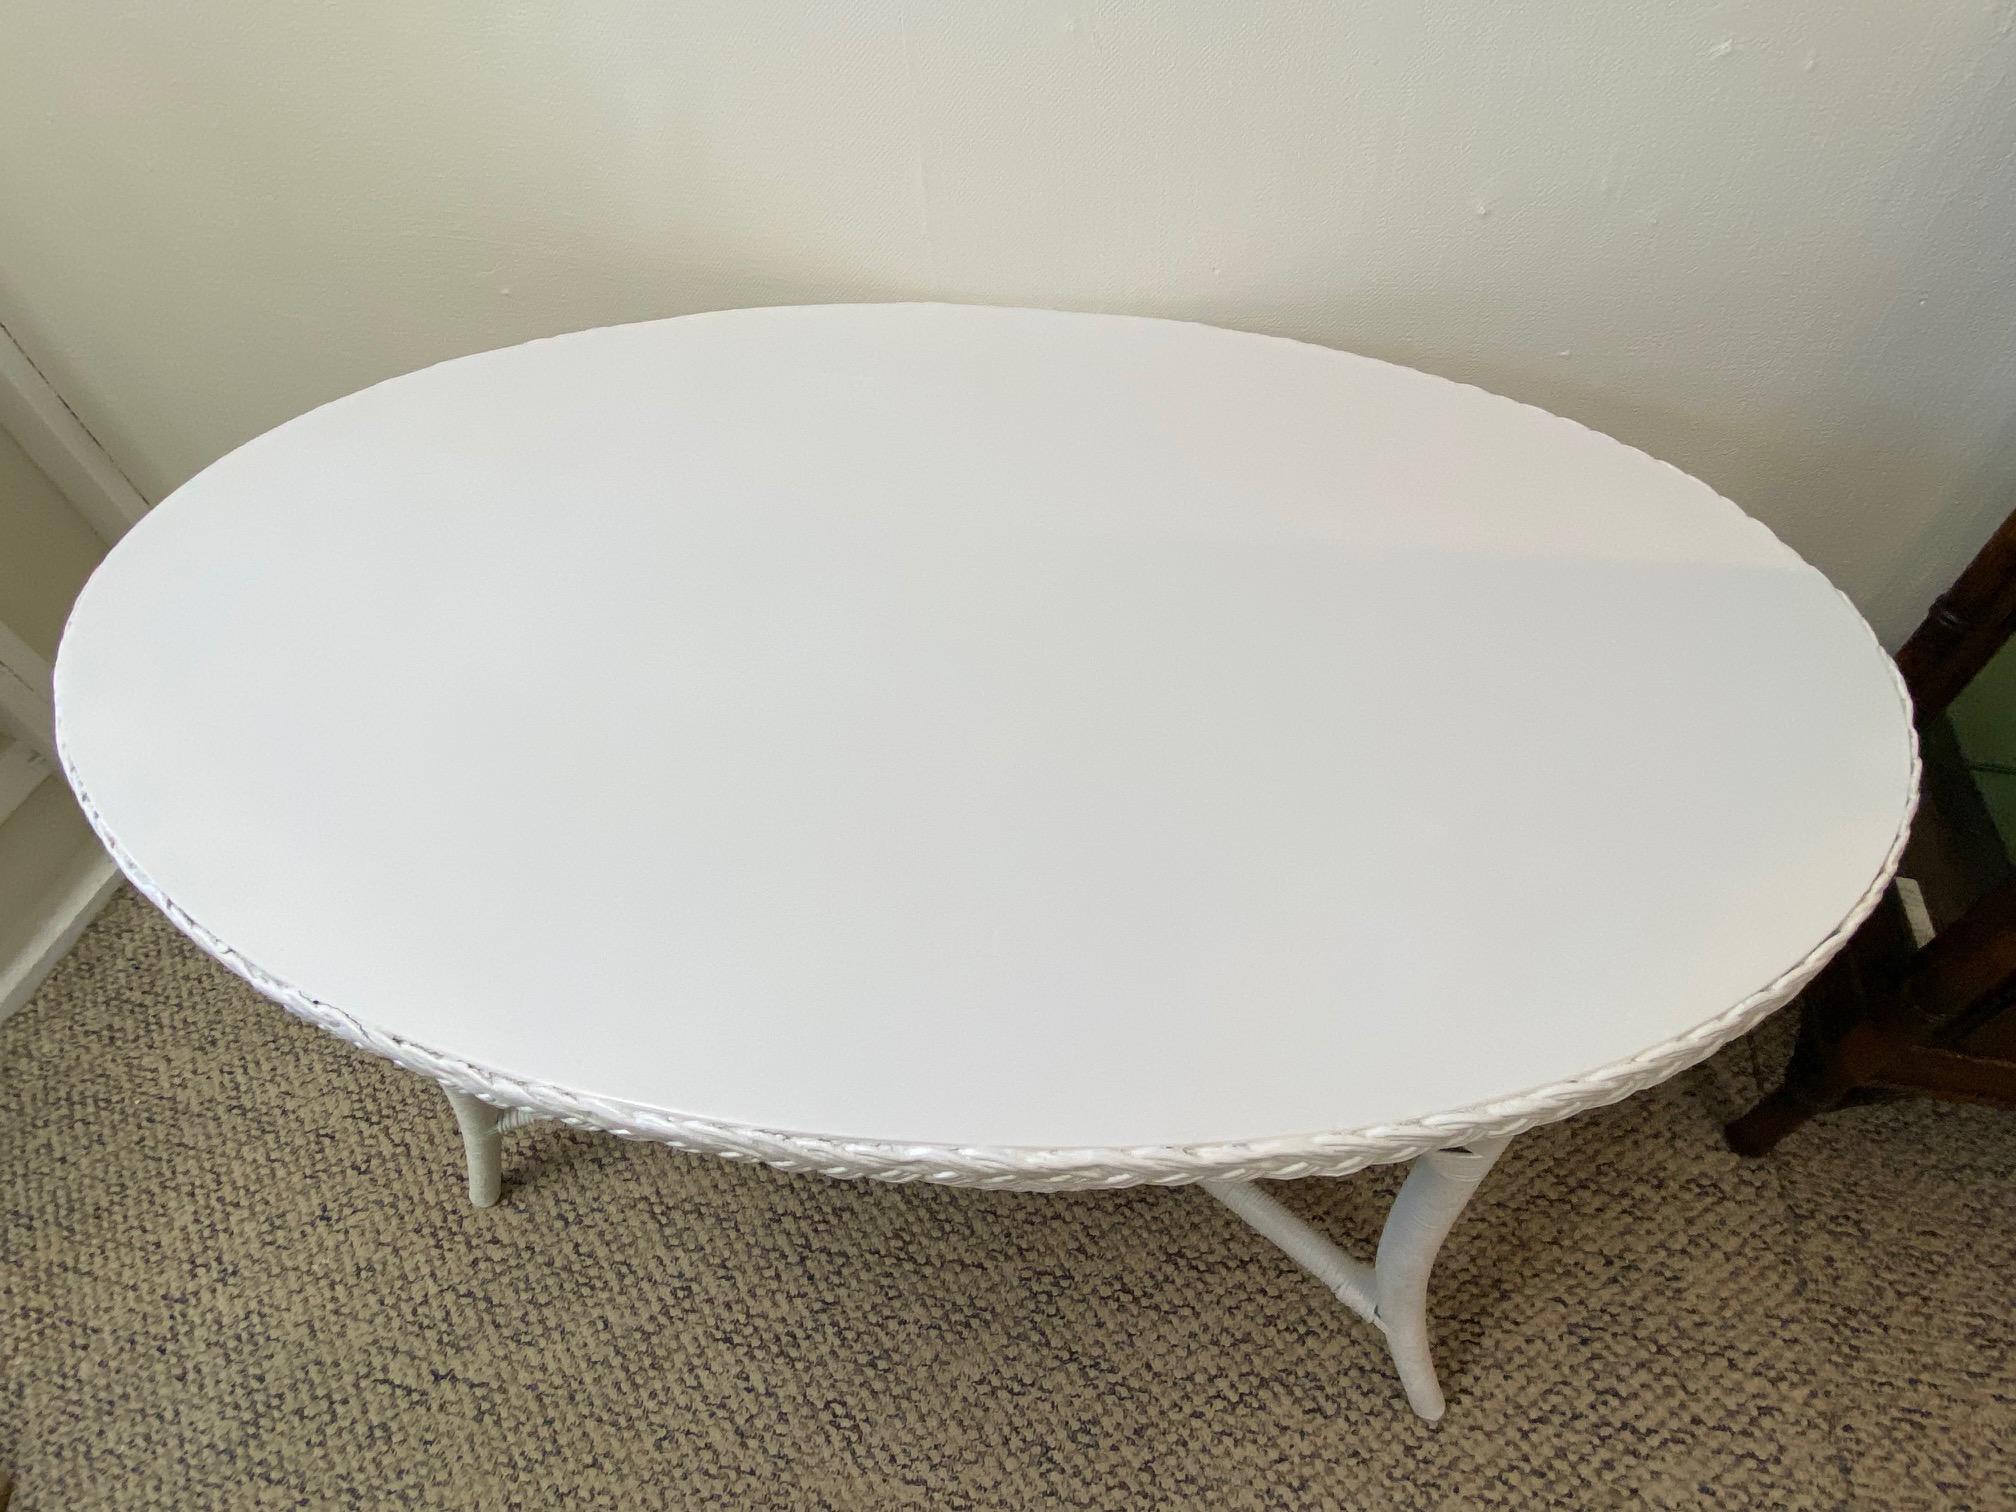 Early 20th Century Vintage American Wicker Company Freshly White Painted Oval Dining Table For Sale